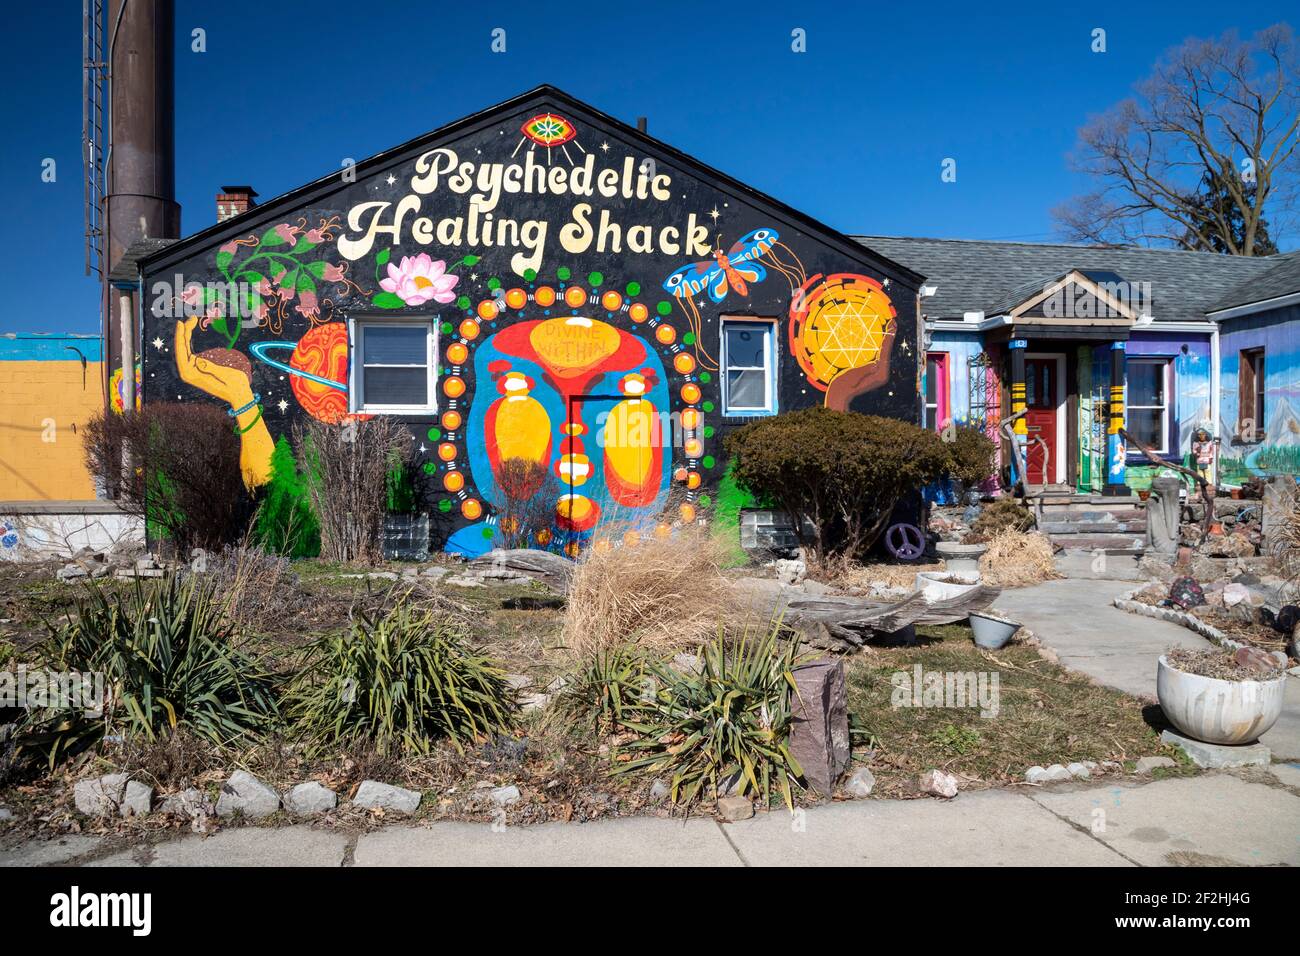 Detroit, Michigan - The Psychedelic Healing Shack, a chiropractic doctor's office and vegetarian cafe. Stock Photo